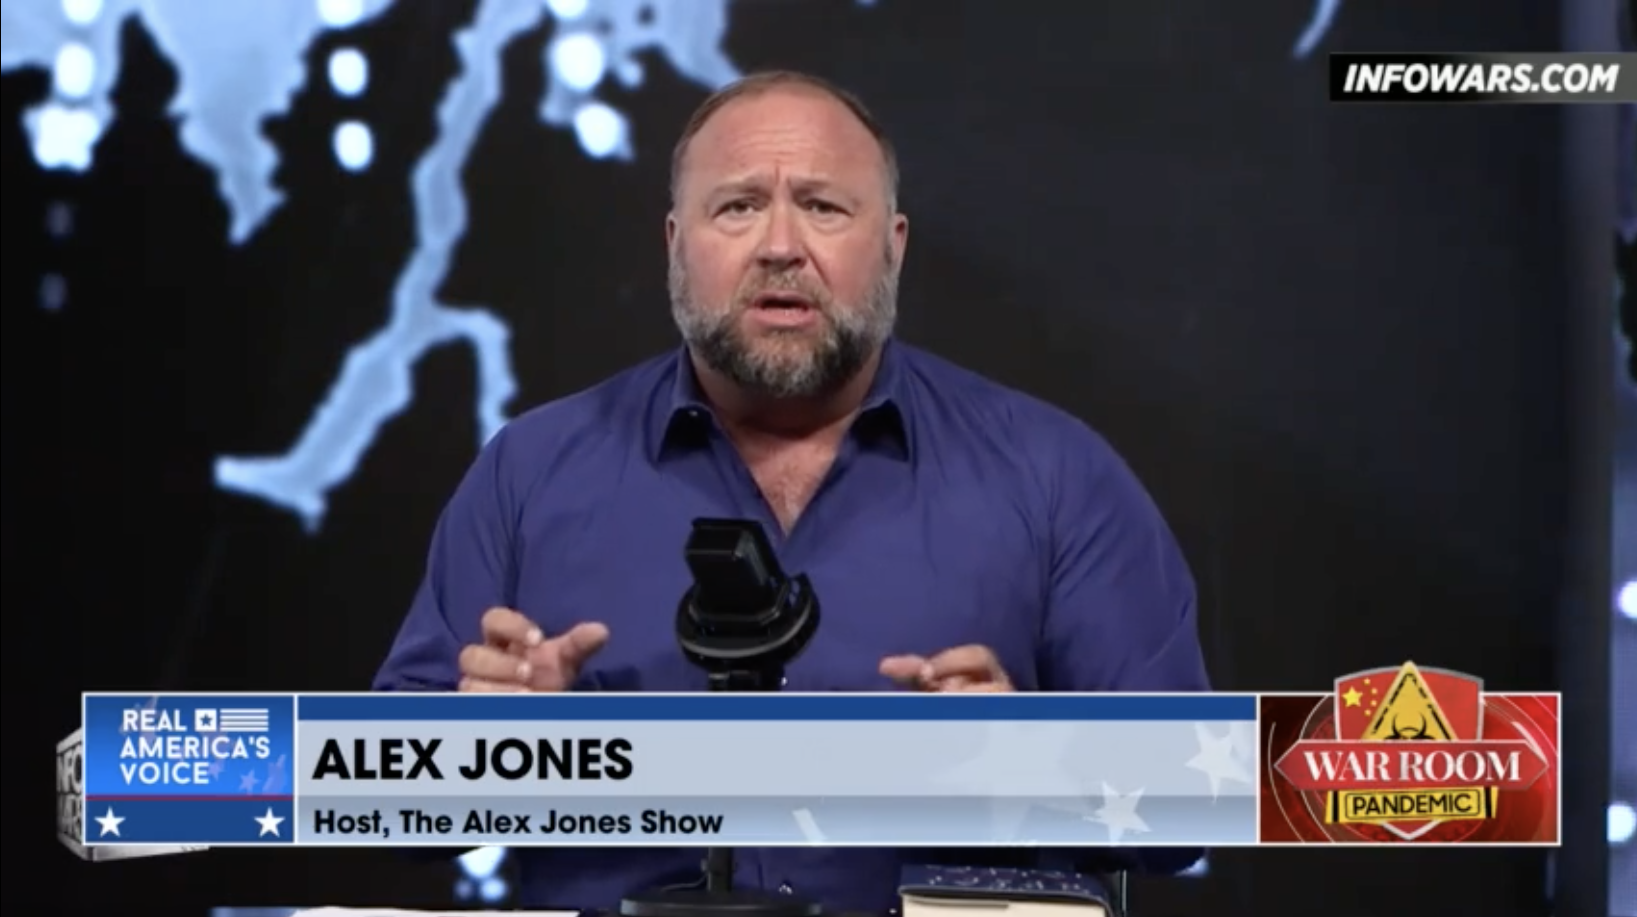 Alex Jones On War Room - This Is A Turning Point In History